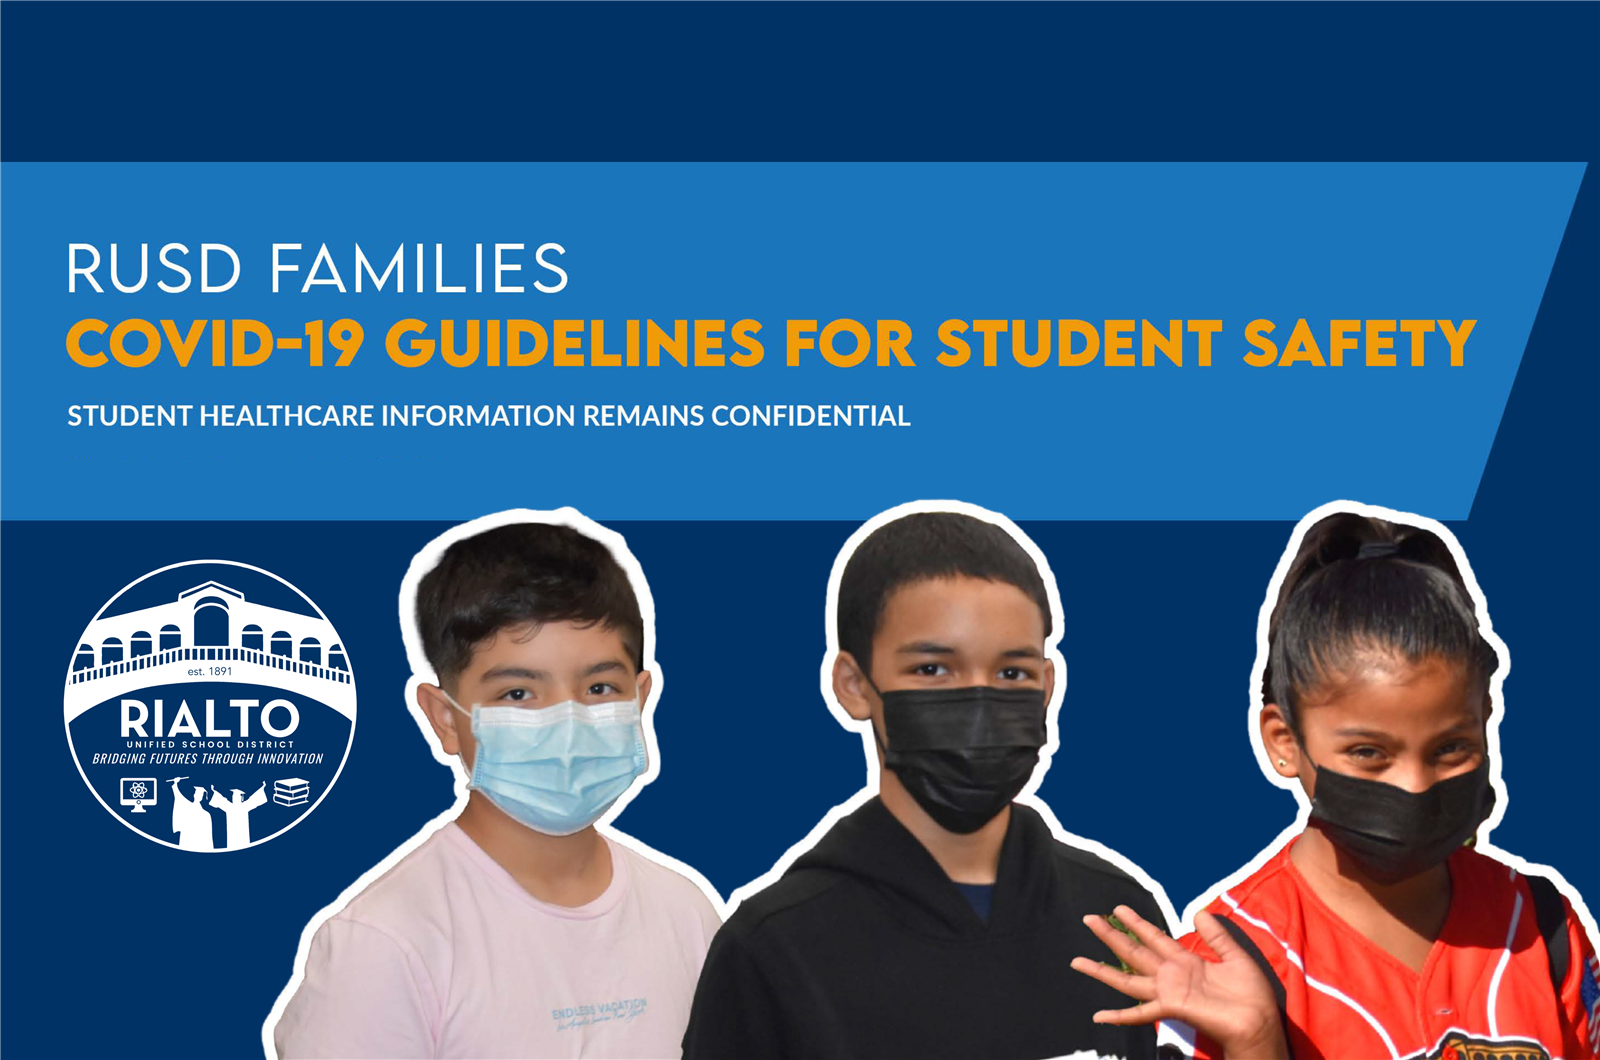 COVID-19 GUIDELINES FOR STUDENT SAFETY